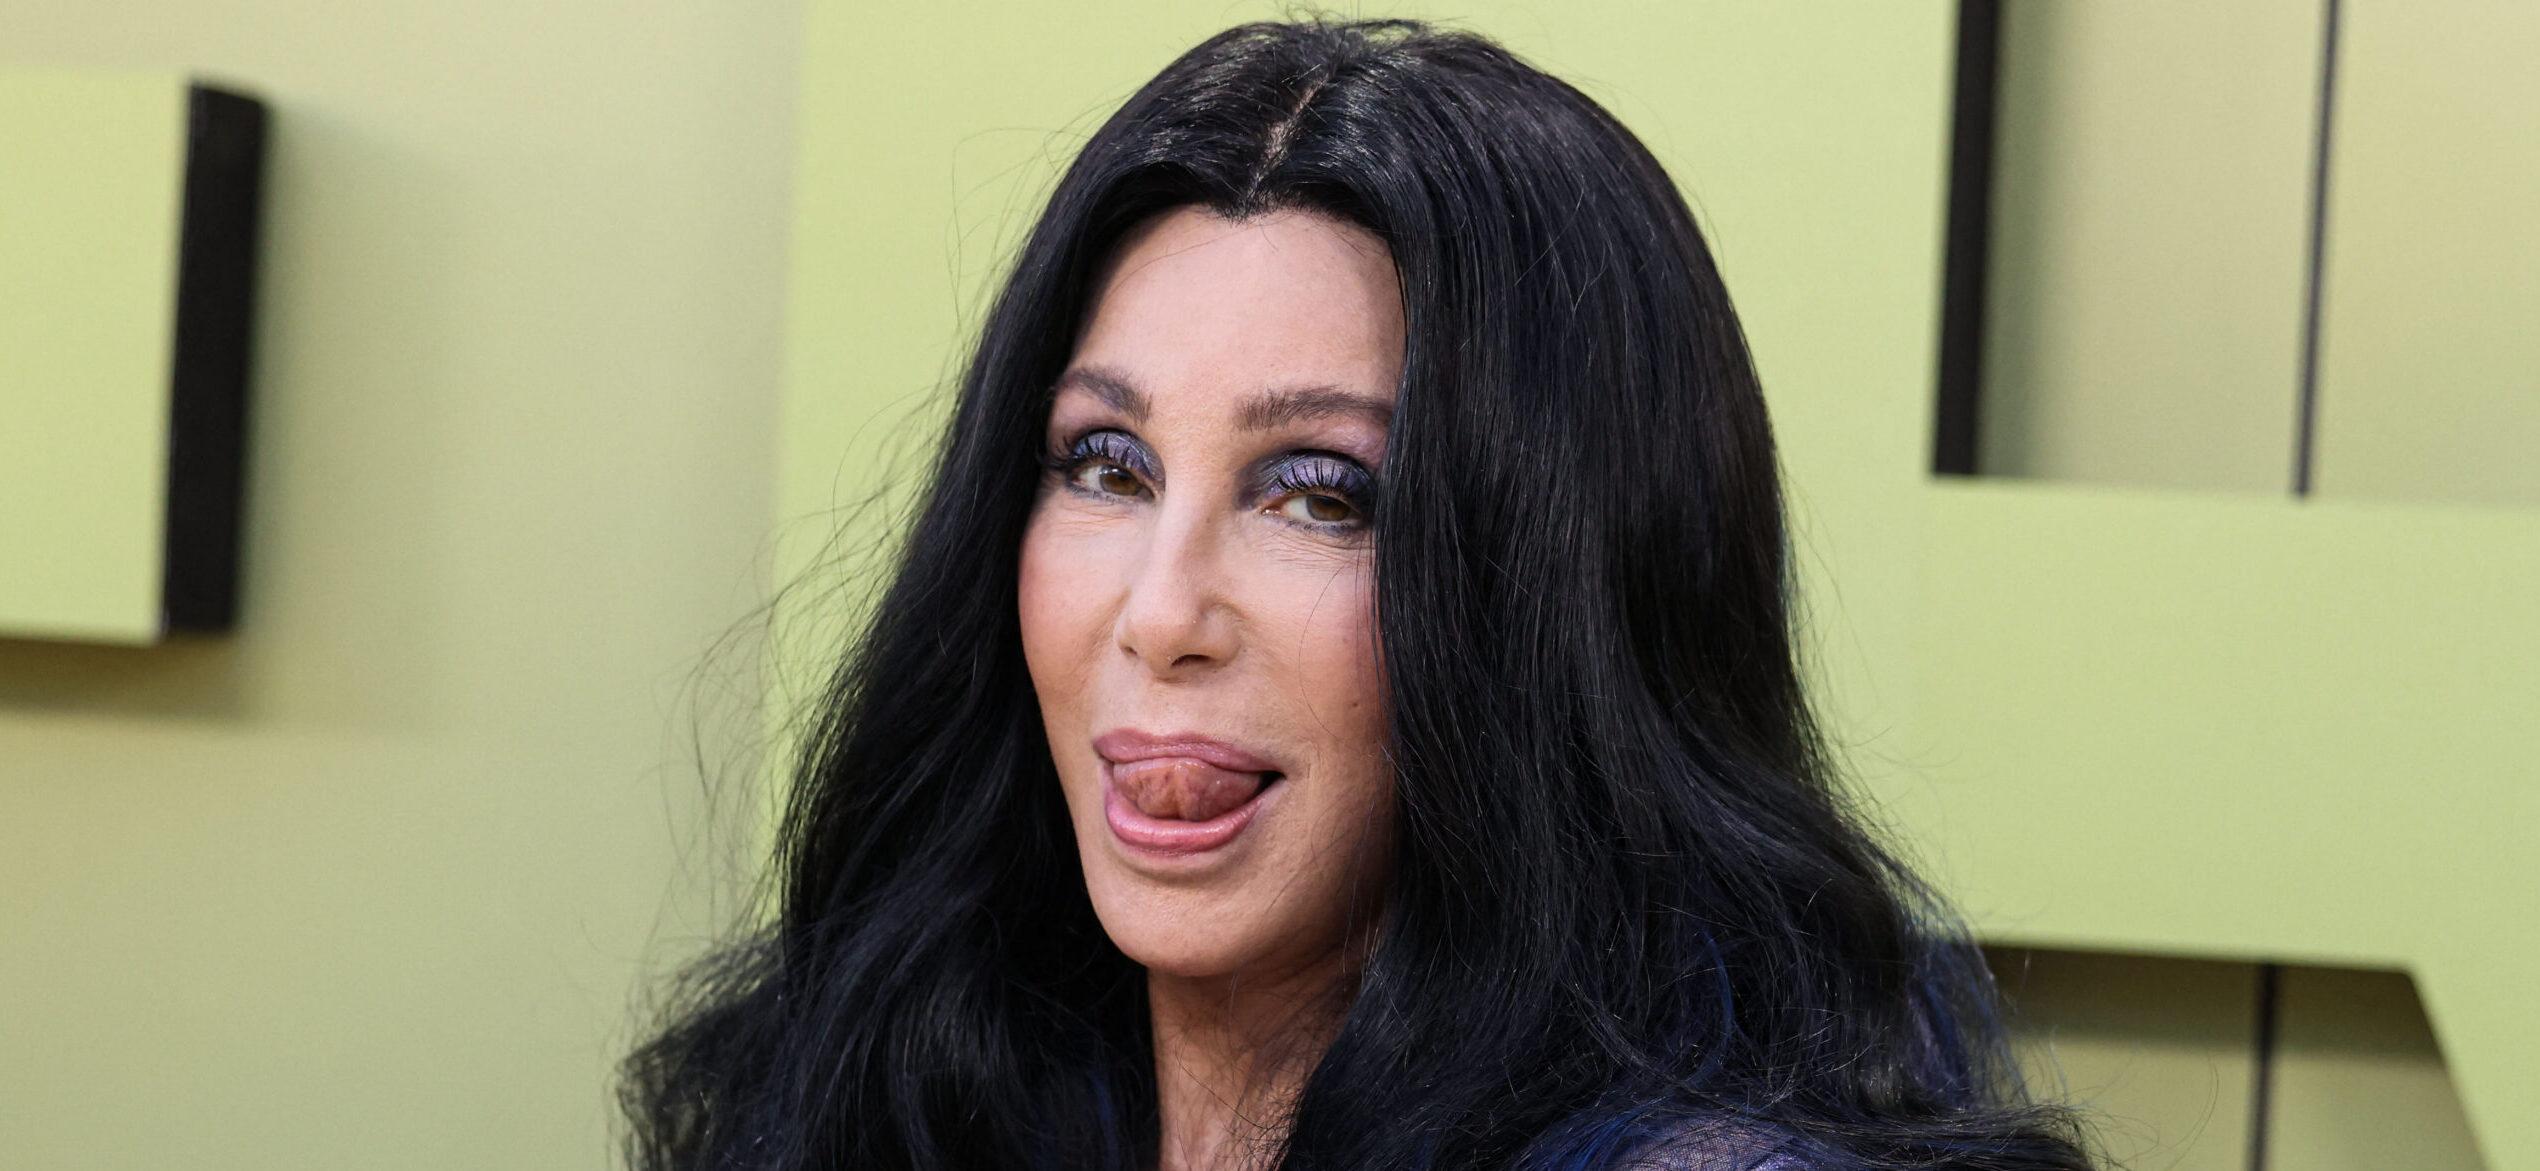 Cher Is Allegedly ‘Concerned’ About Her Son, Chaz Bono’s ’30-Pound’ Weight Gain